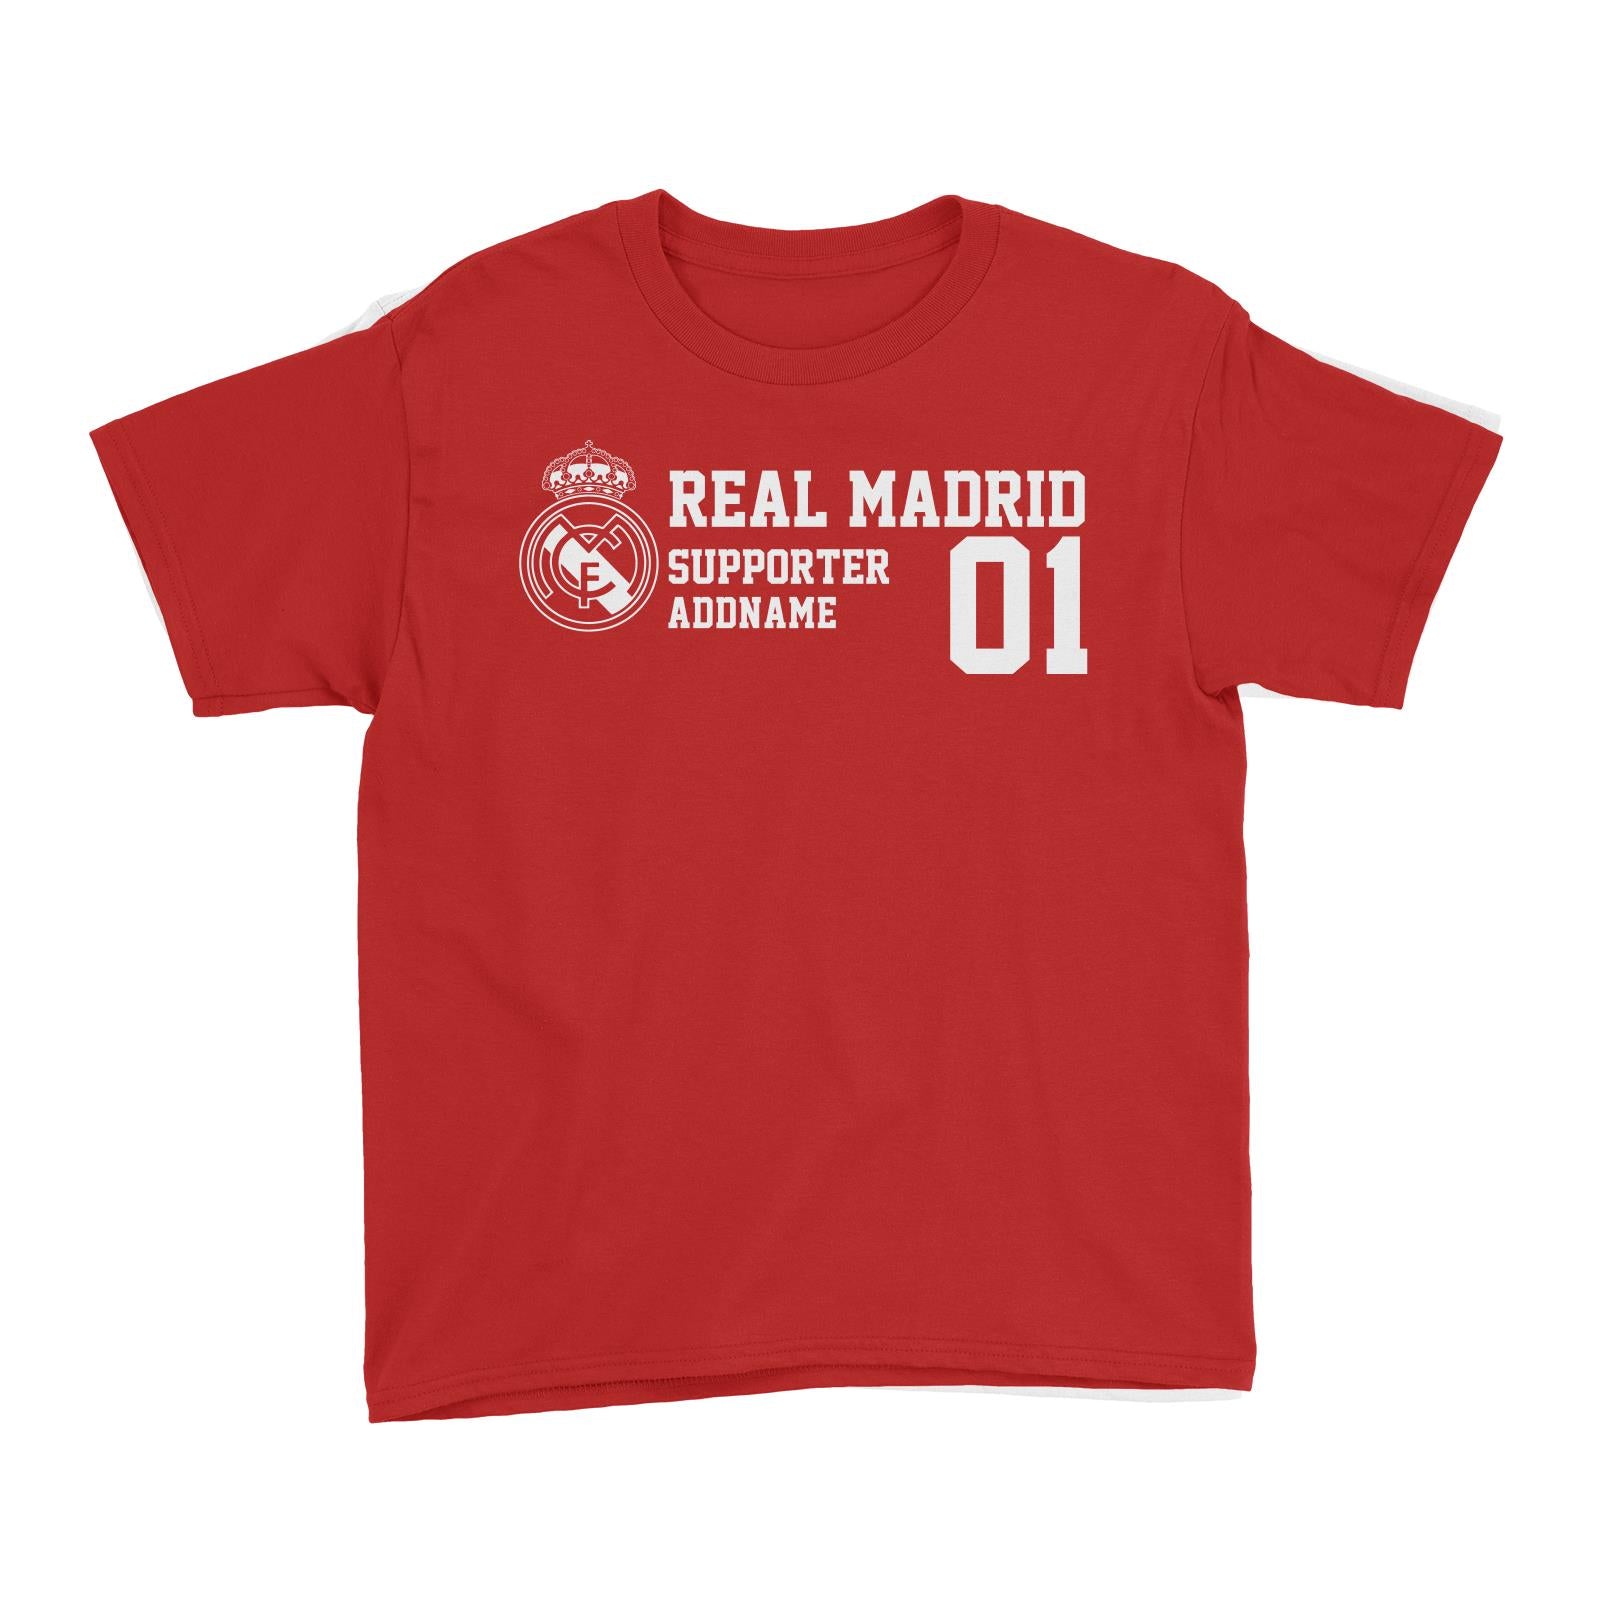 Real Madrid Football Supporter Addname Kid's T-Shirt